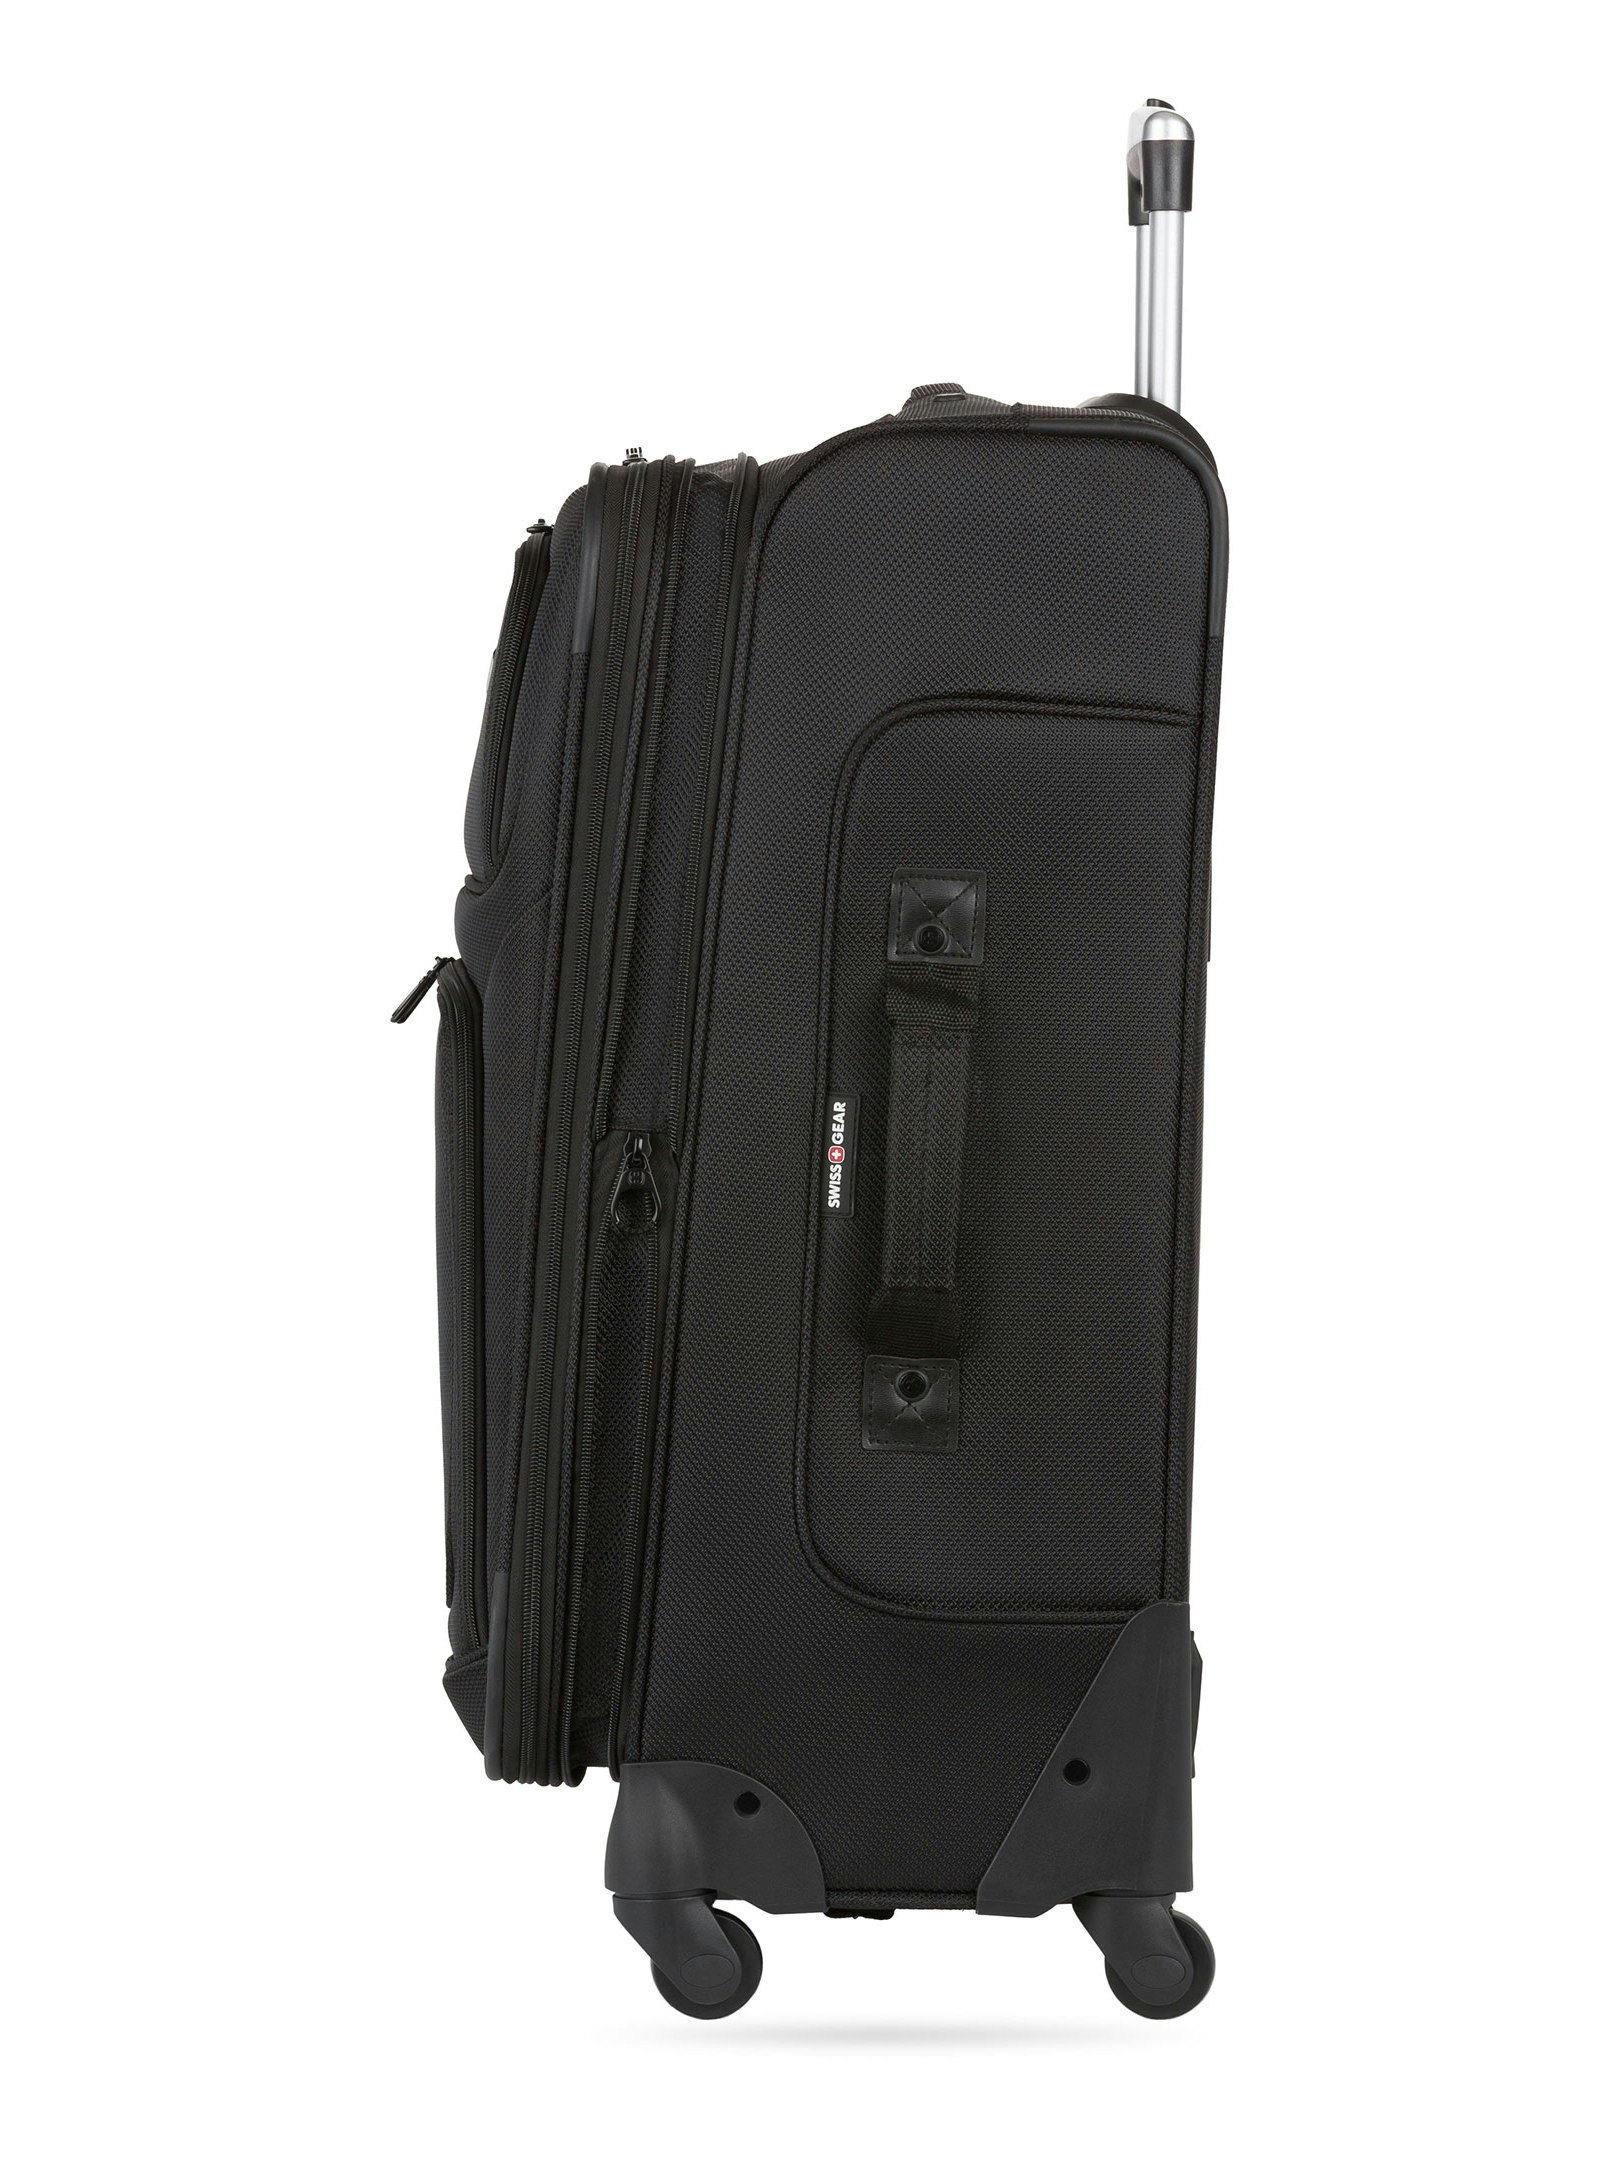 6283 Series Luggage Side View